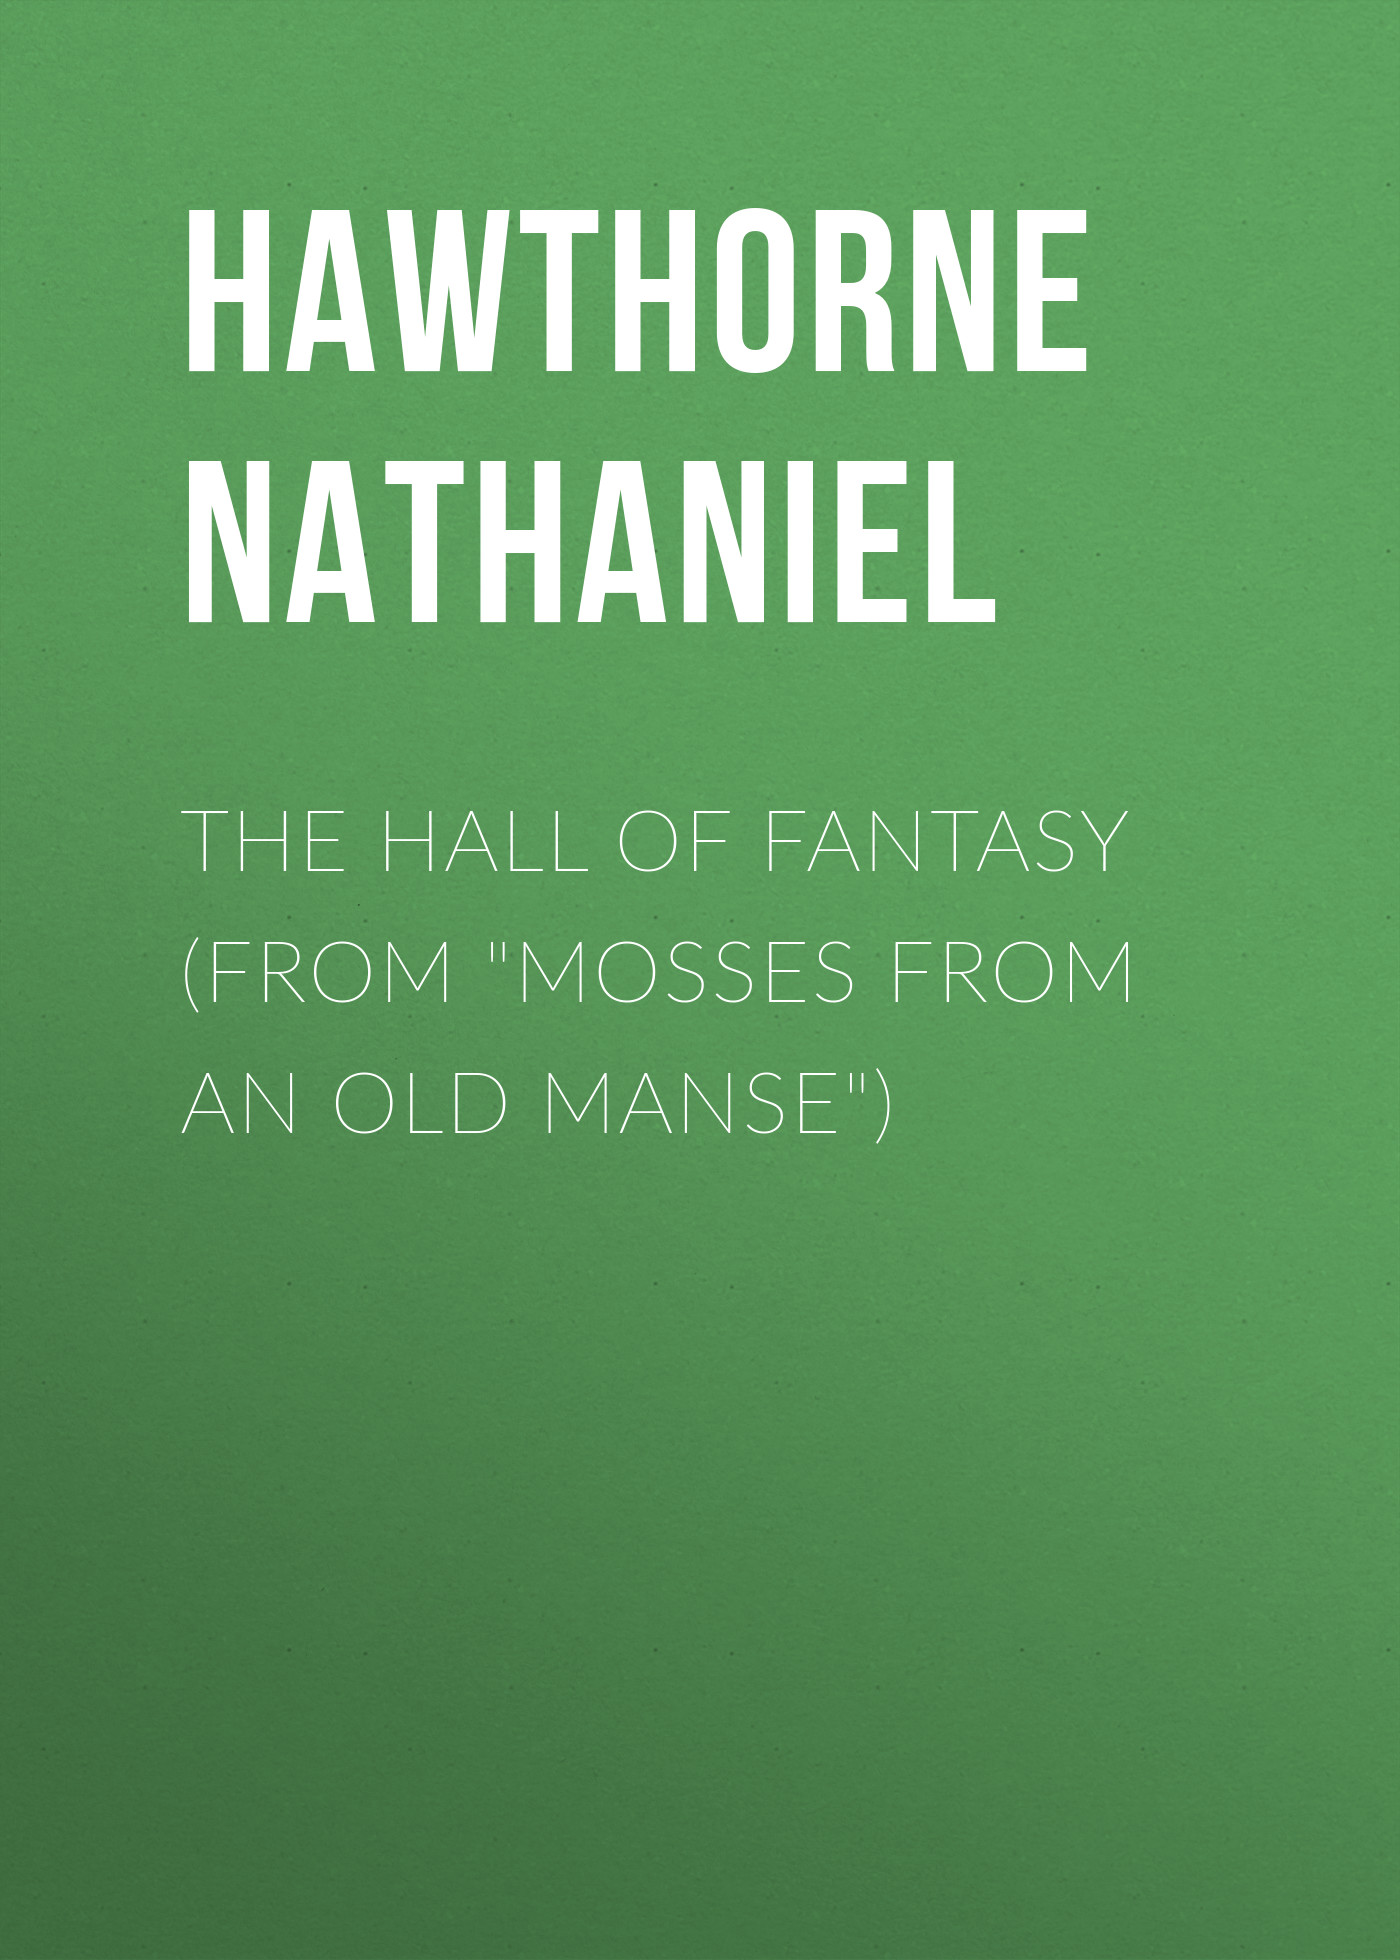 The Hall of Fantasy (From "Mosses from an Old Manse")